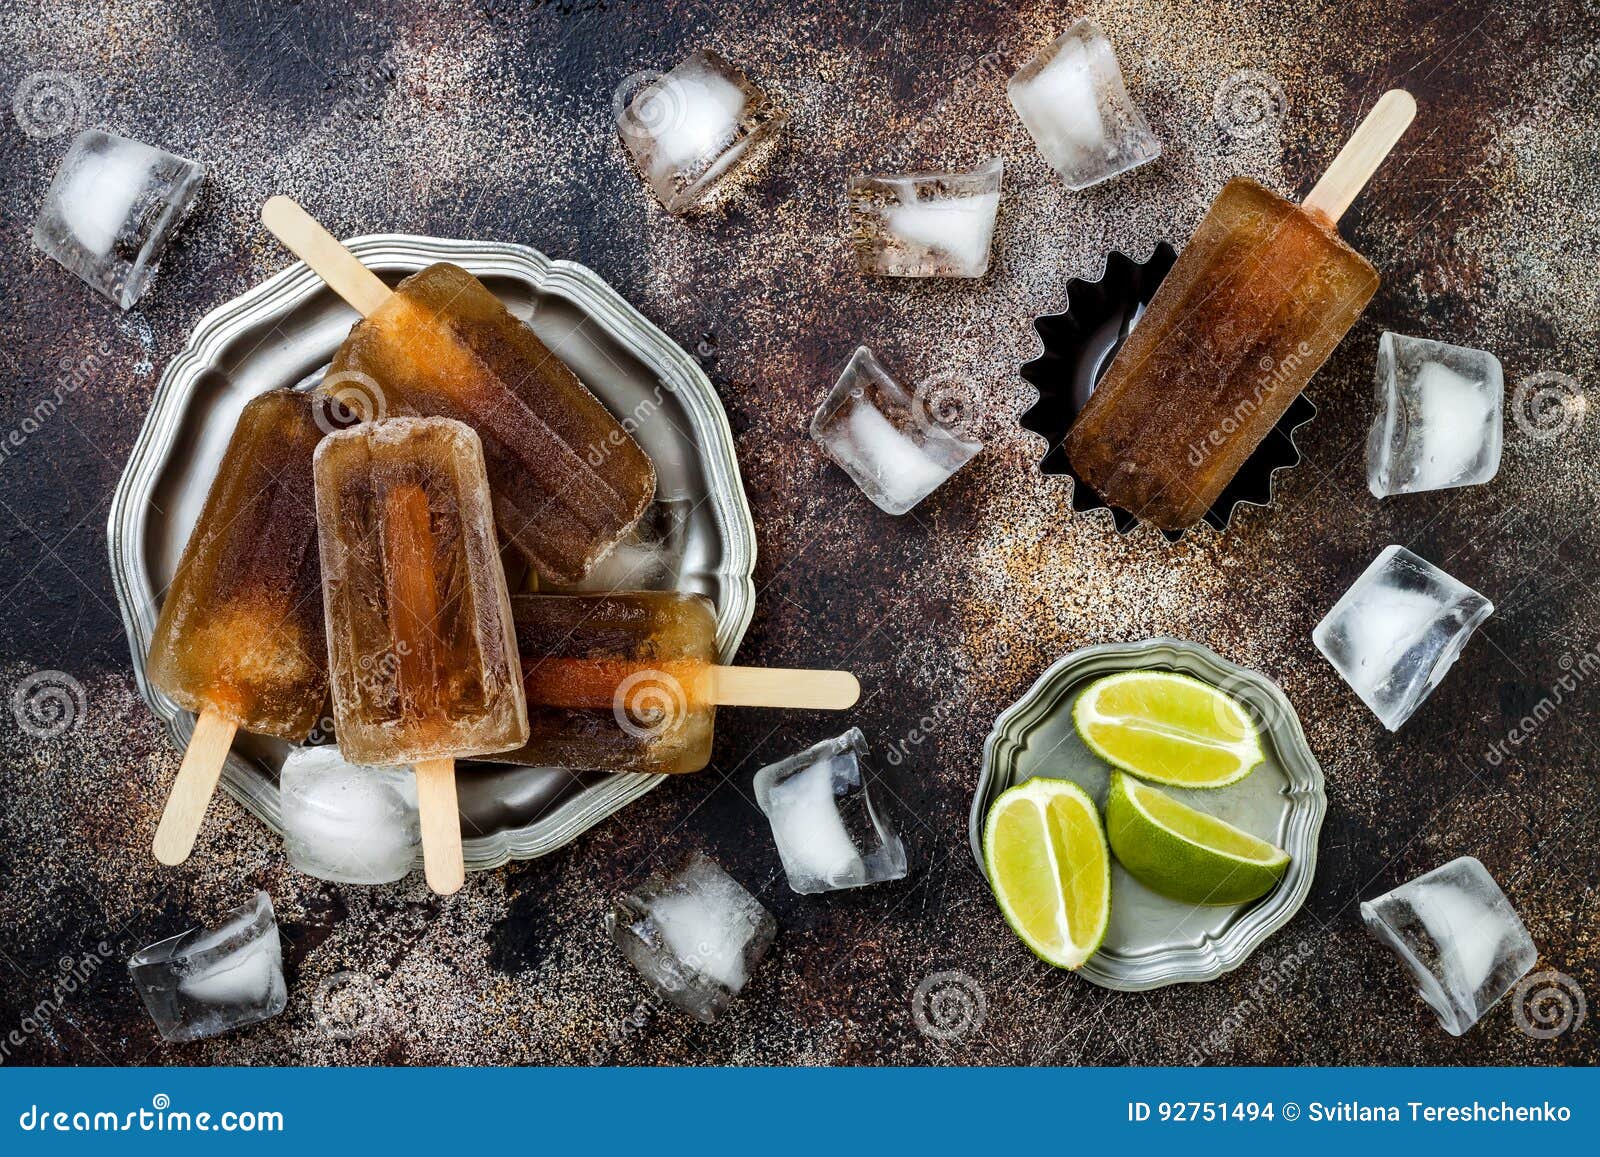 rum and coke cocktail popsicles with lime juice. cuba libre homemade frozen alcoholic paletas - ice pops. overhead, flat lay